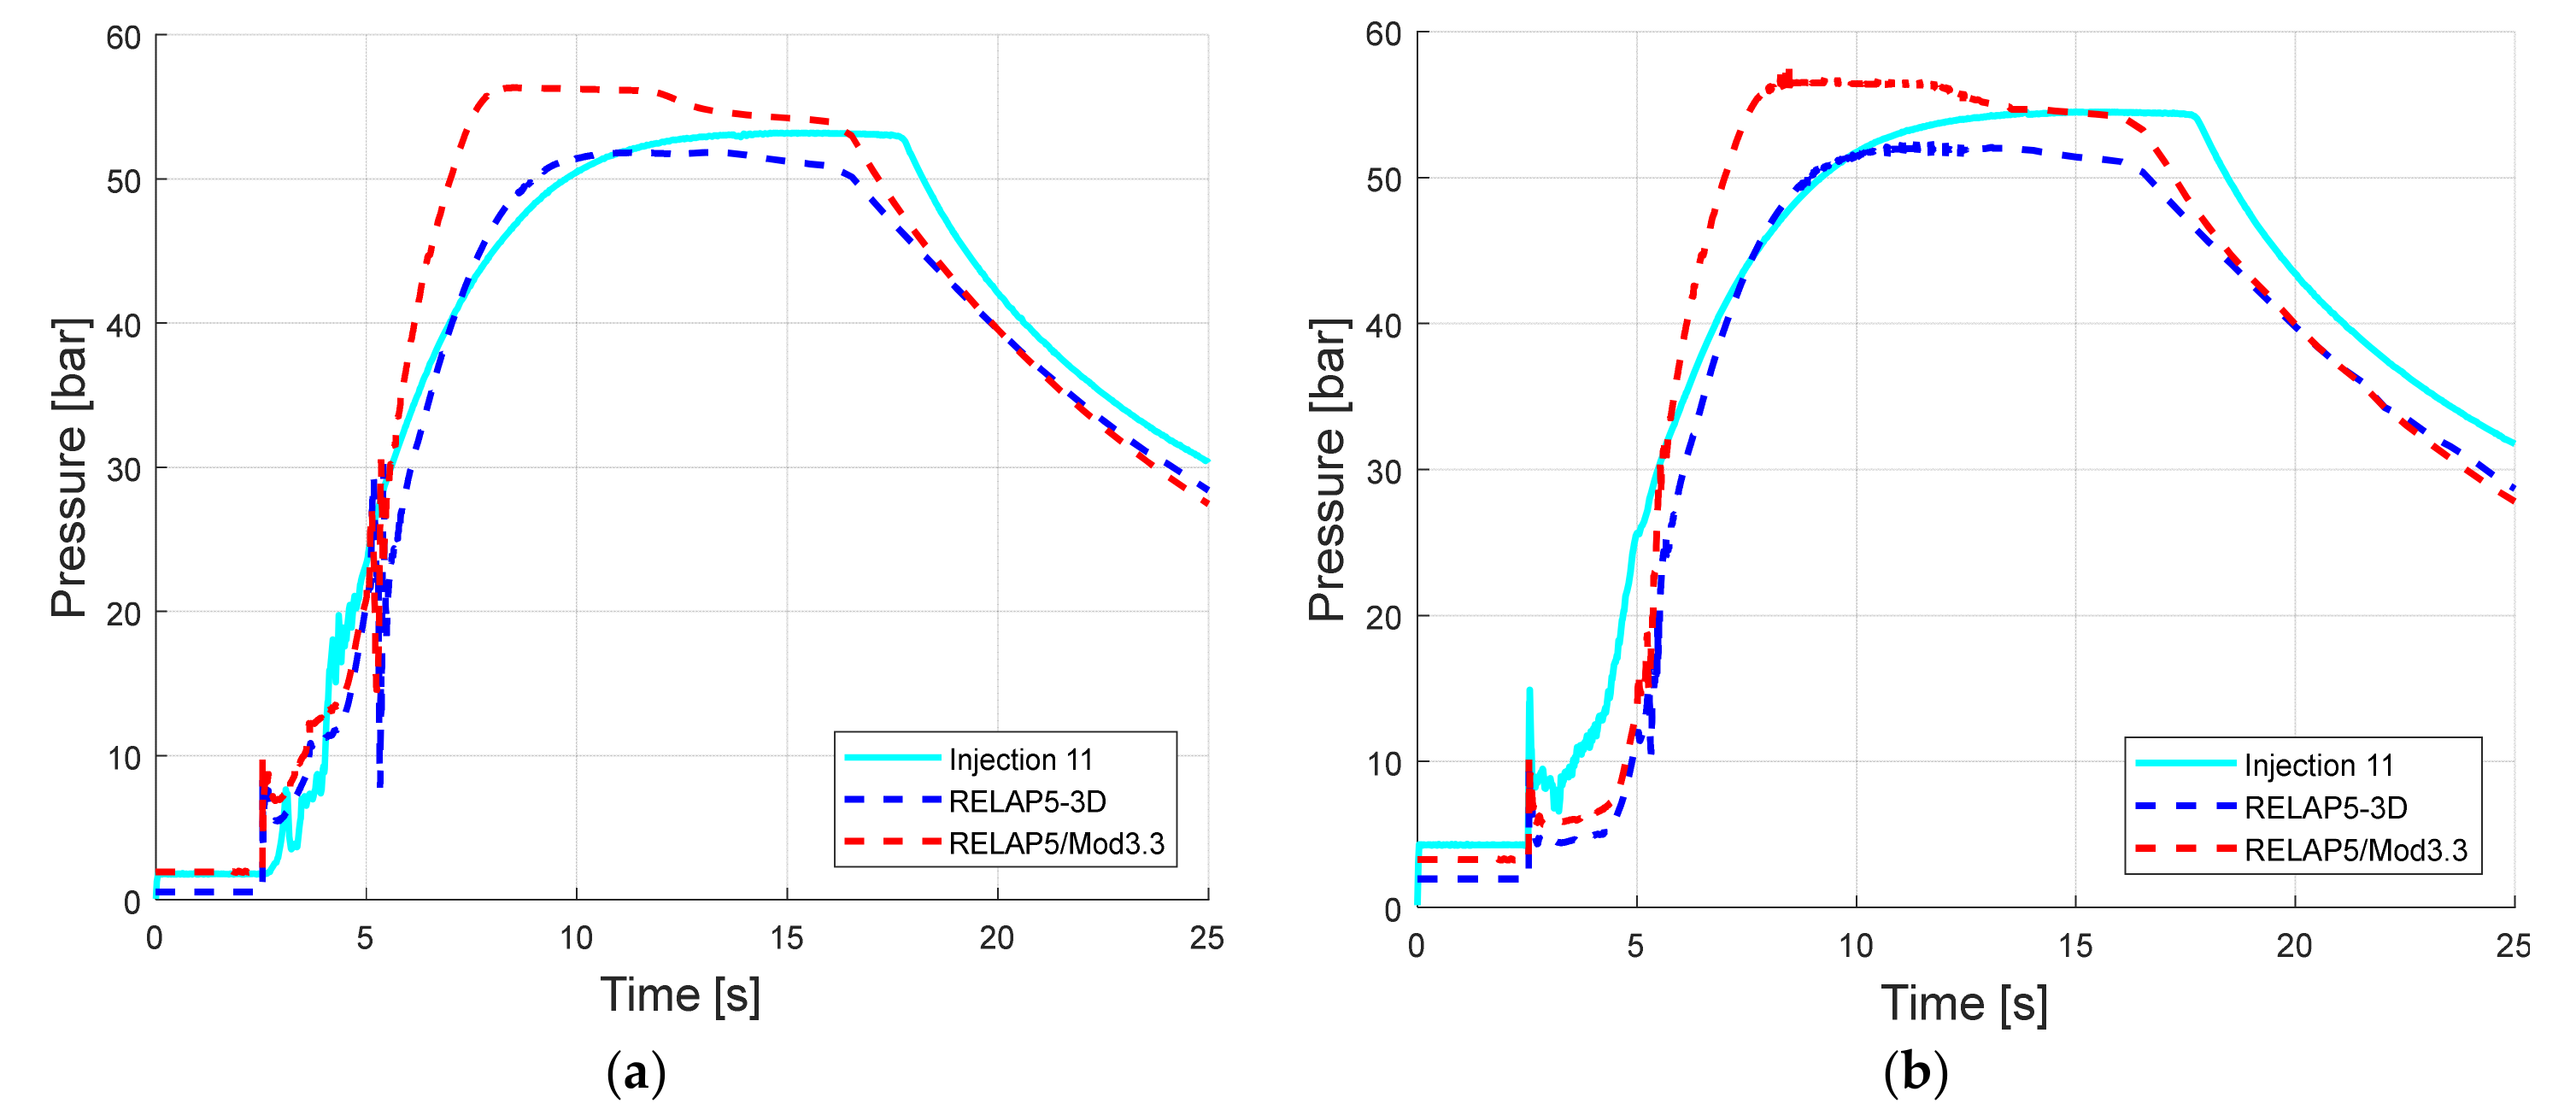 Energies | Free Full-Text | Numerical Simulations with RELAP5-3D and  RELAP5/mod3.3 of the Second Experimental Campaign on In-Box LOCA Transients  for HCLL TBS | HTML